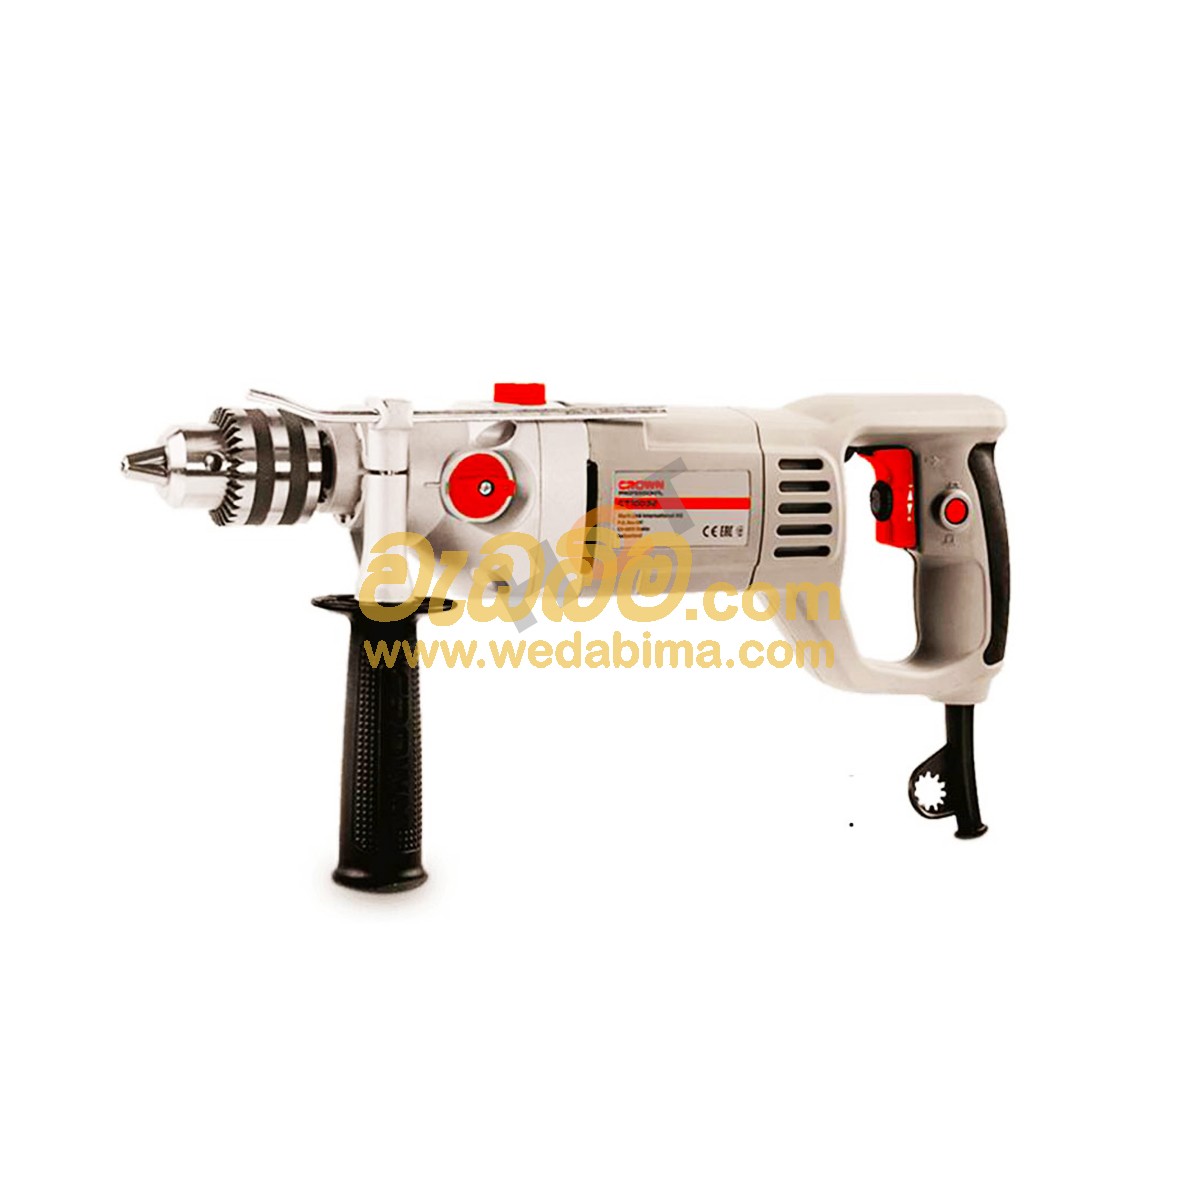 Cover image for CROWN IMPACT DRILL 1050W 16MM